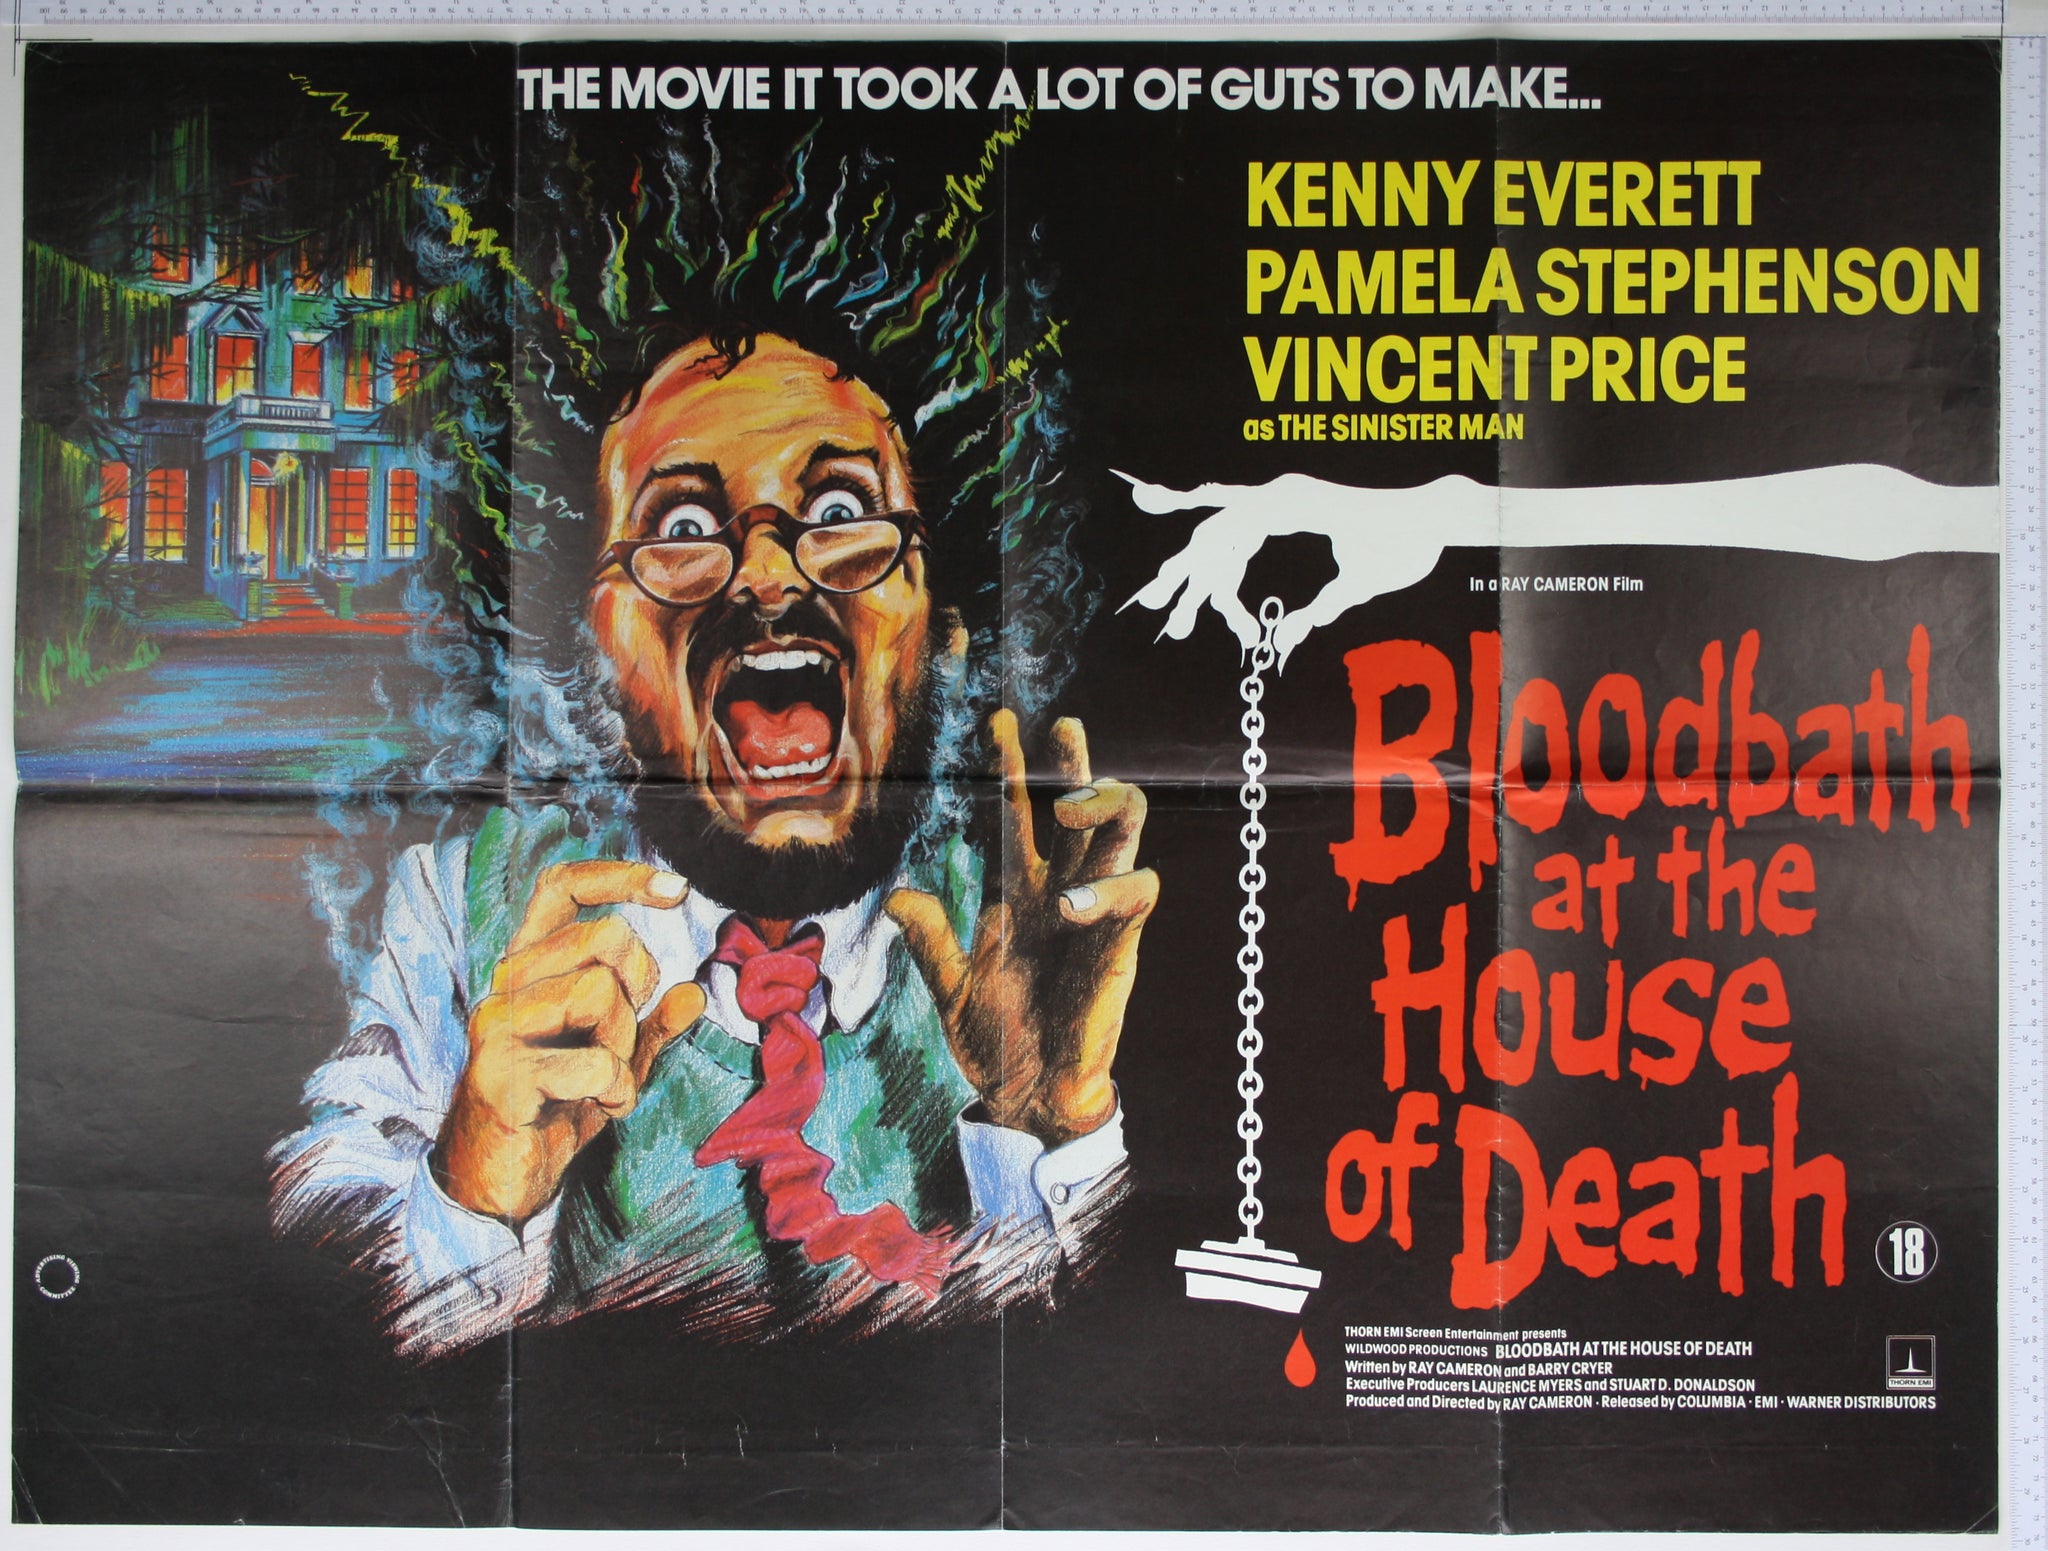 Cartoon artwork with shocked Everett screaming and sinister house at rear. Title in red, and white graphic hand holding bathplug.